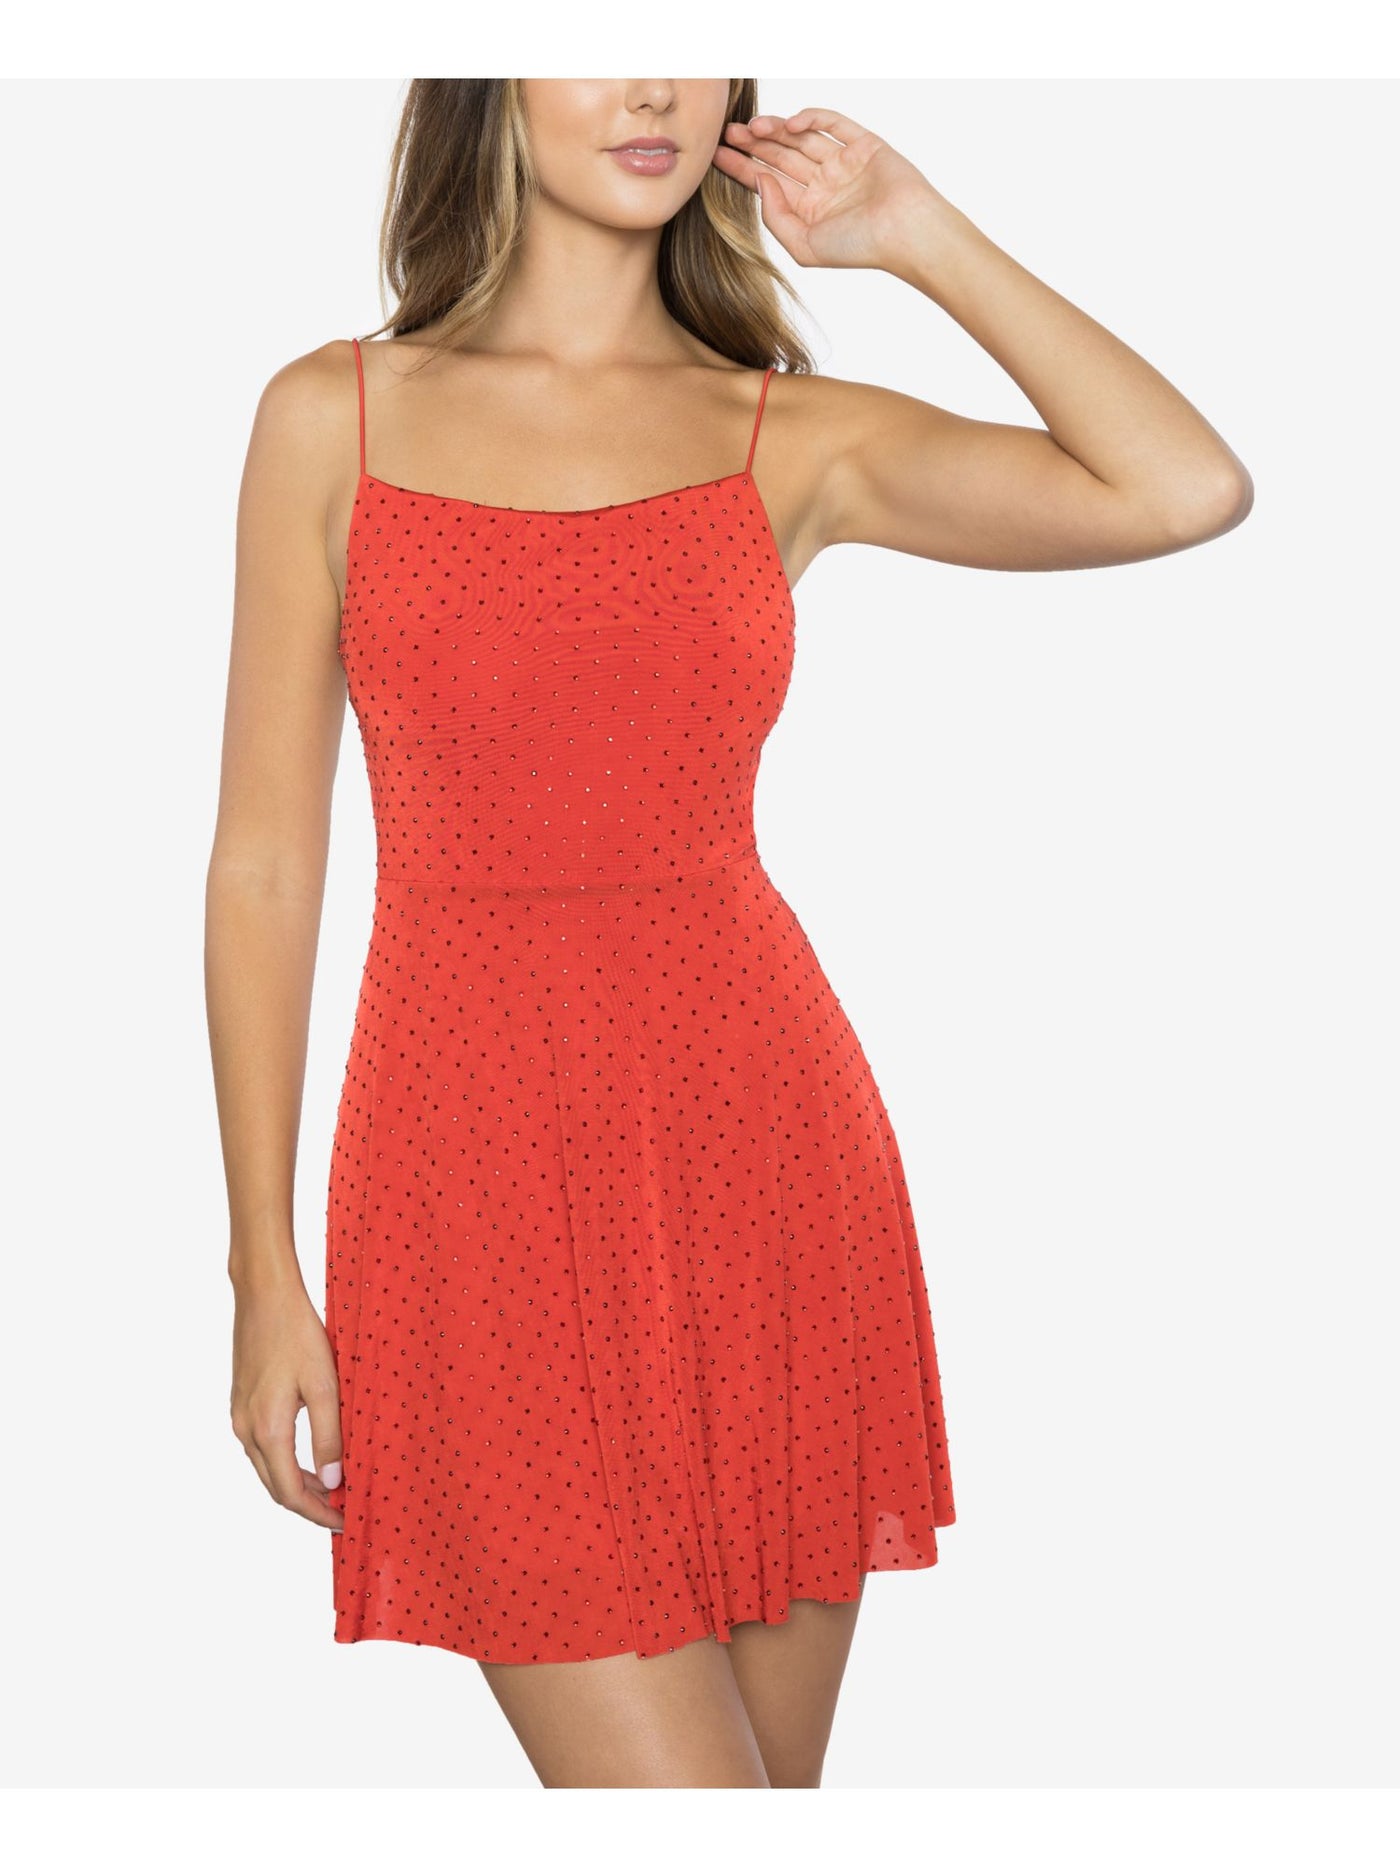 B DARLIN Womens Red Embellished Spaghetti Strap Square Neck Short Party A-Line Dress Juniors 7\8